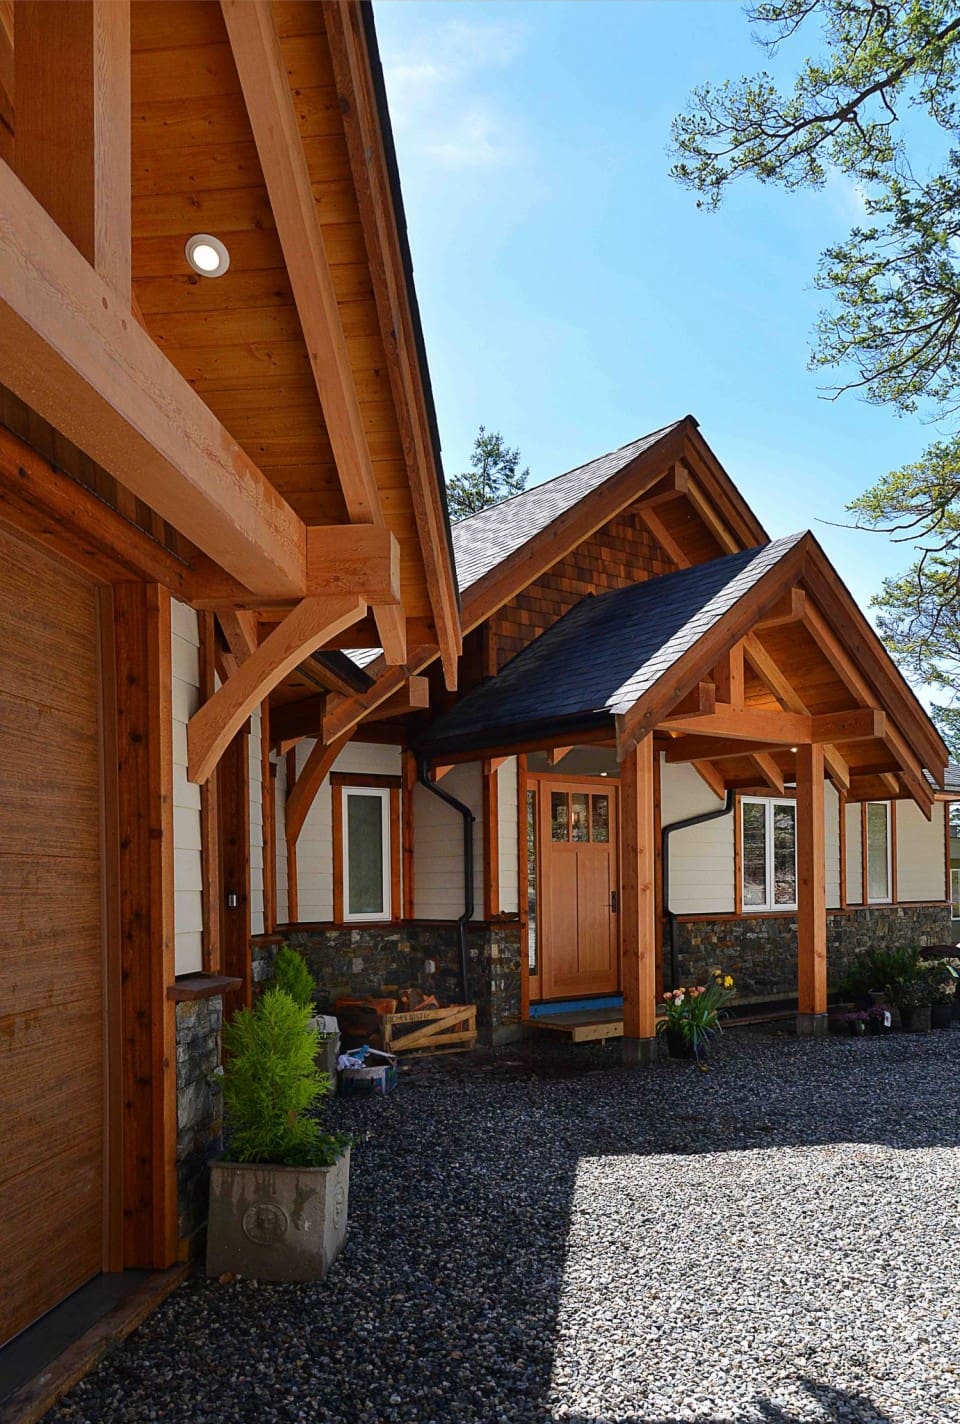 A sideview of the outside of a timber frame home